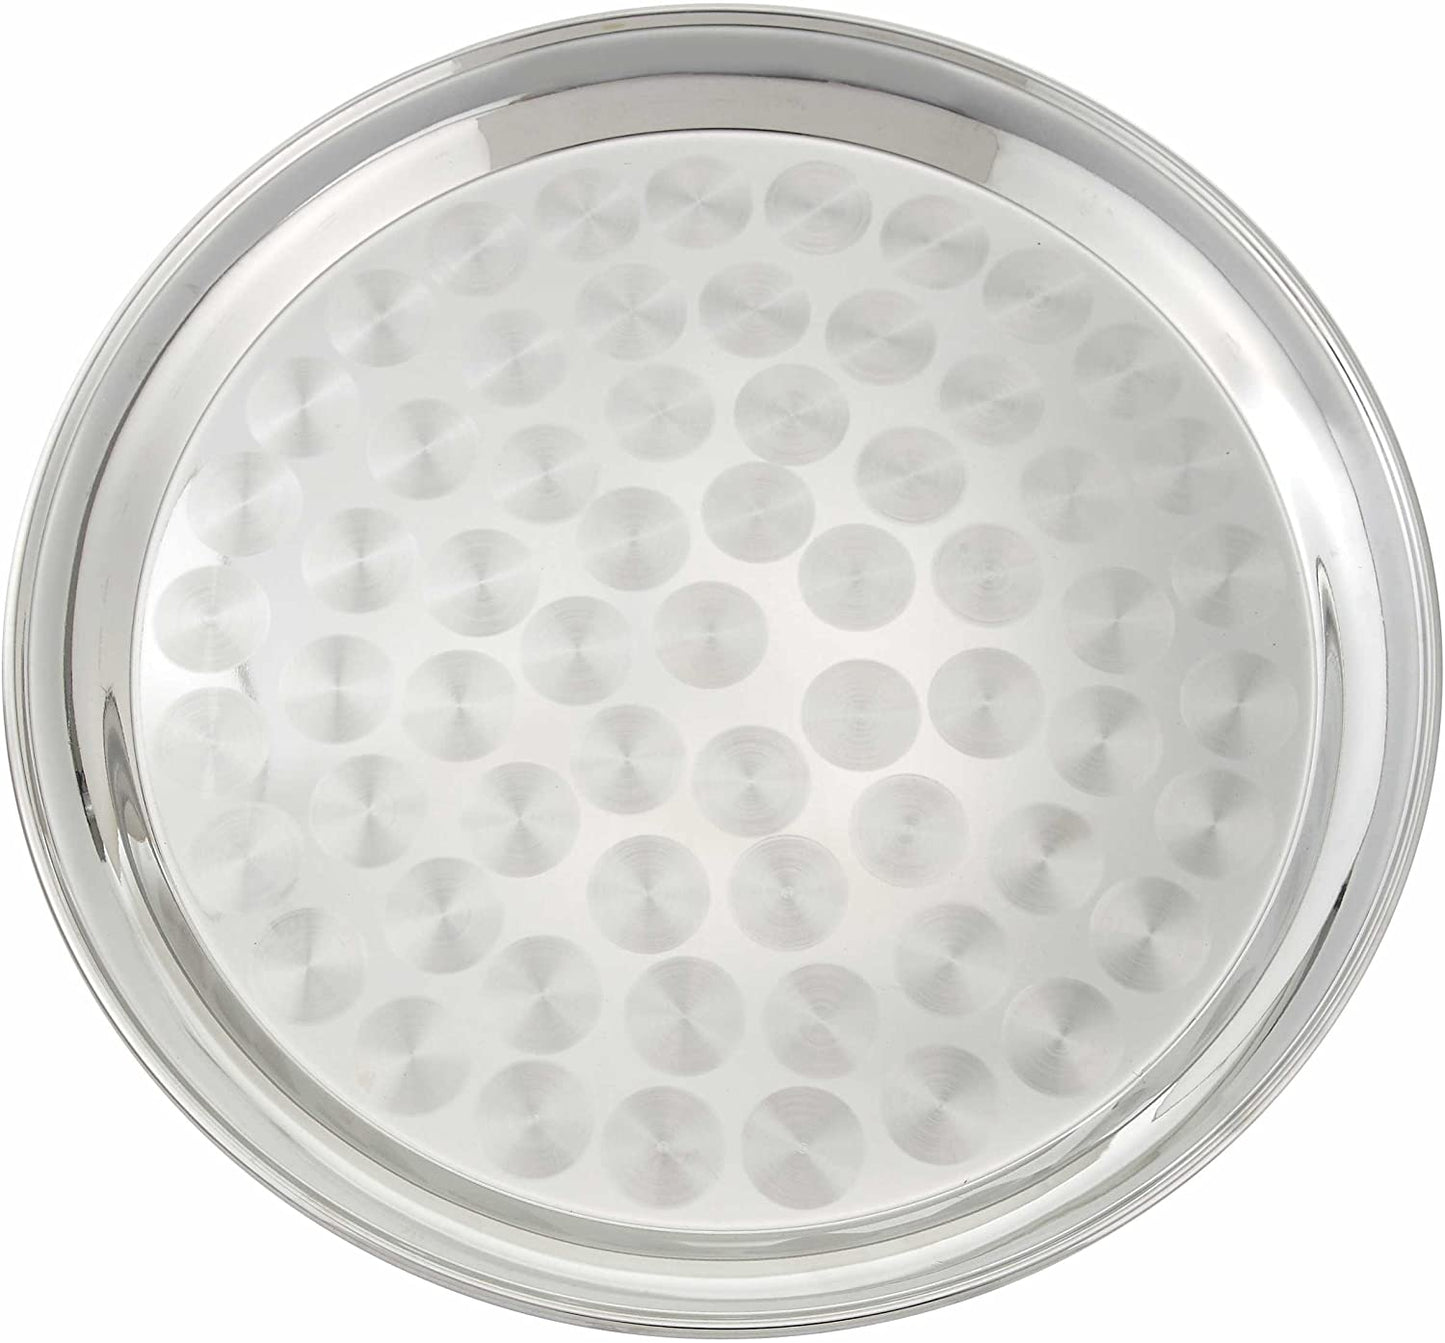 50cm Classy Round Stainless Steal Serving Tray